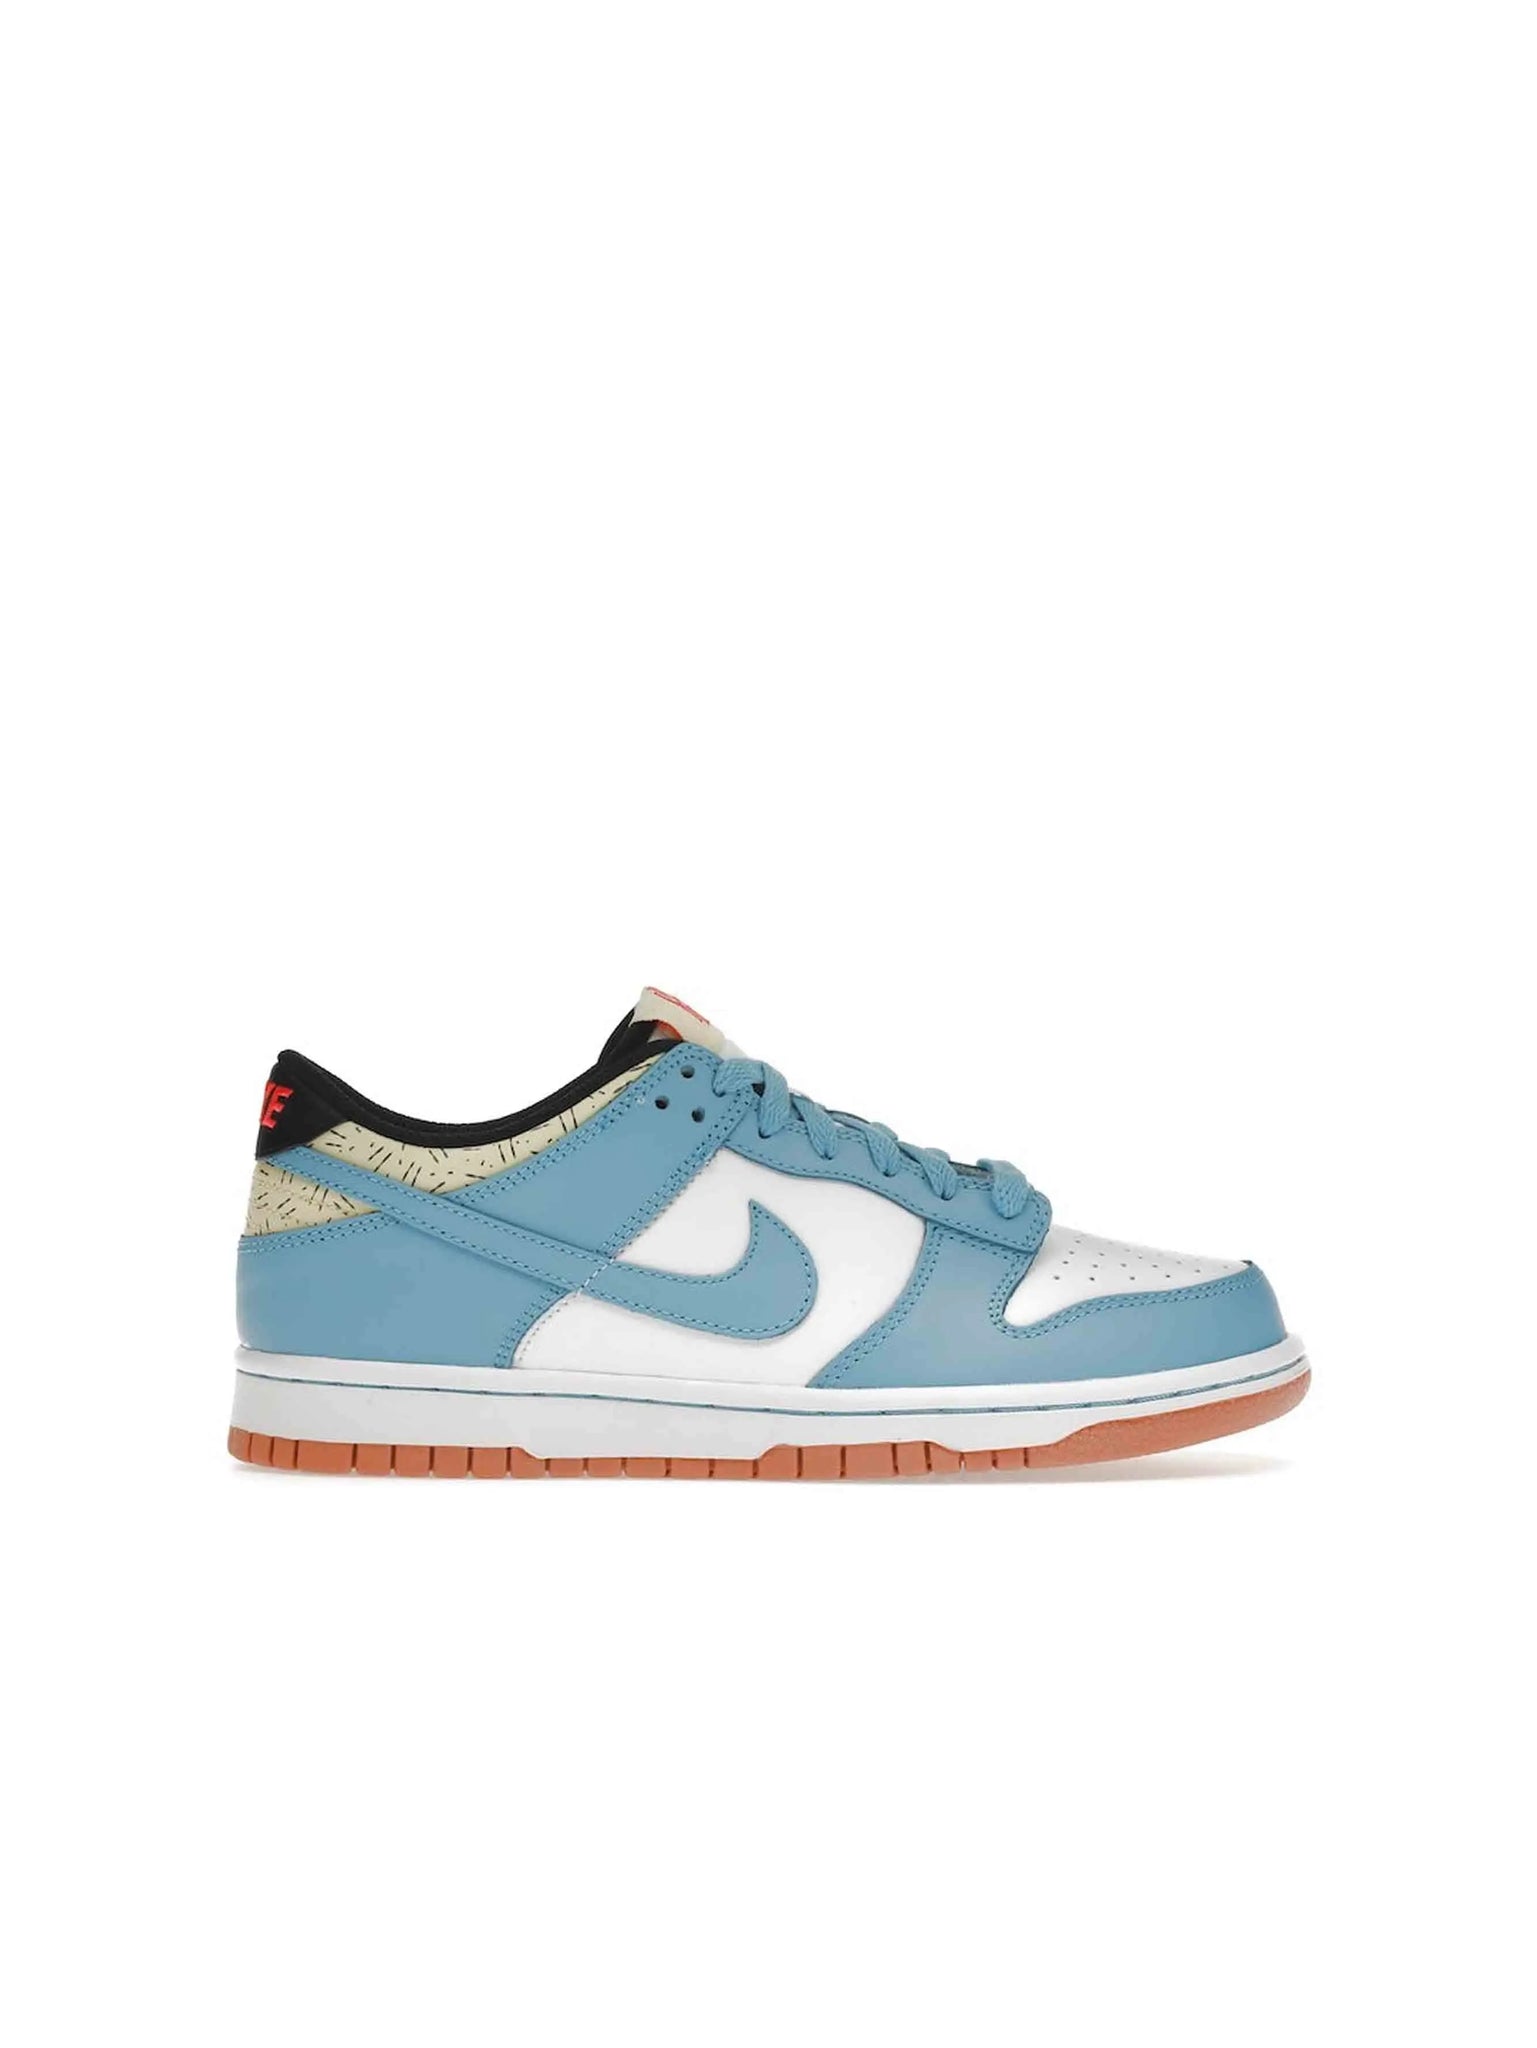 Nike Dunk Low Kyrie Irving Baltic Blue (GS) - Prior